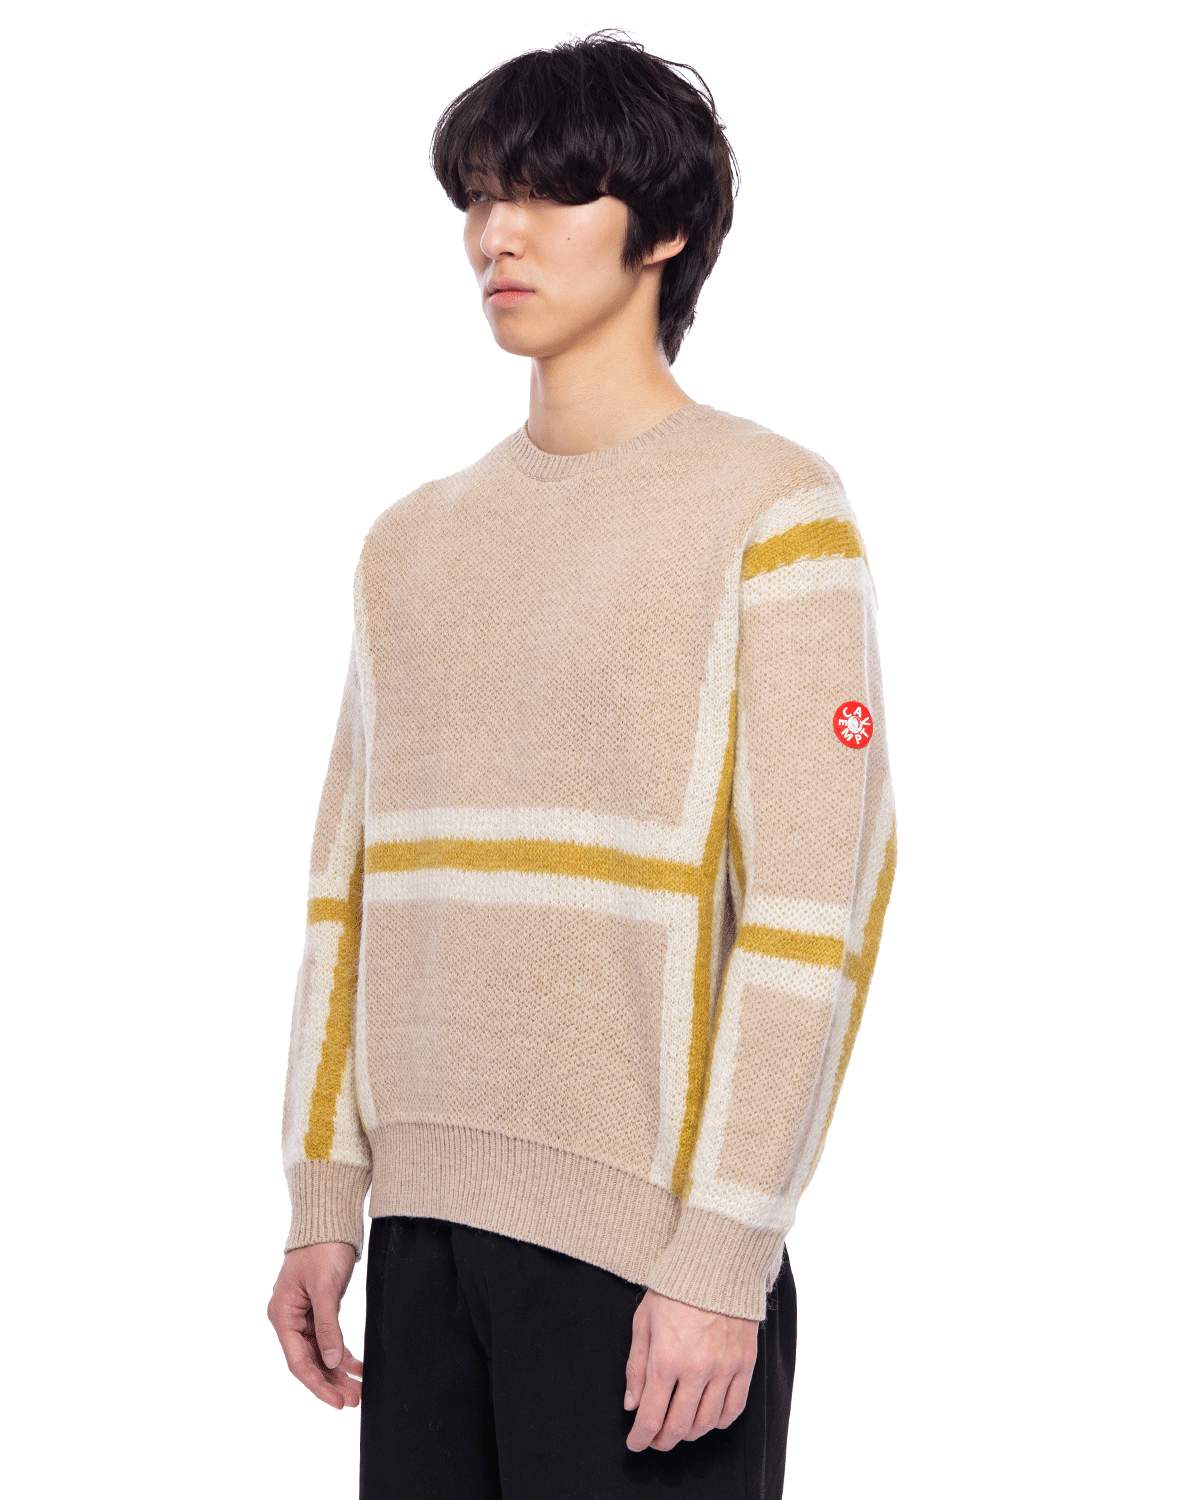 Indefinable Boundary Knit Beige